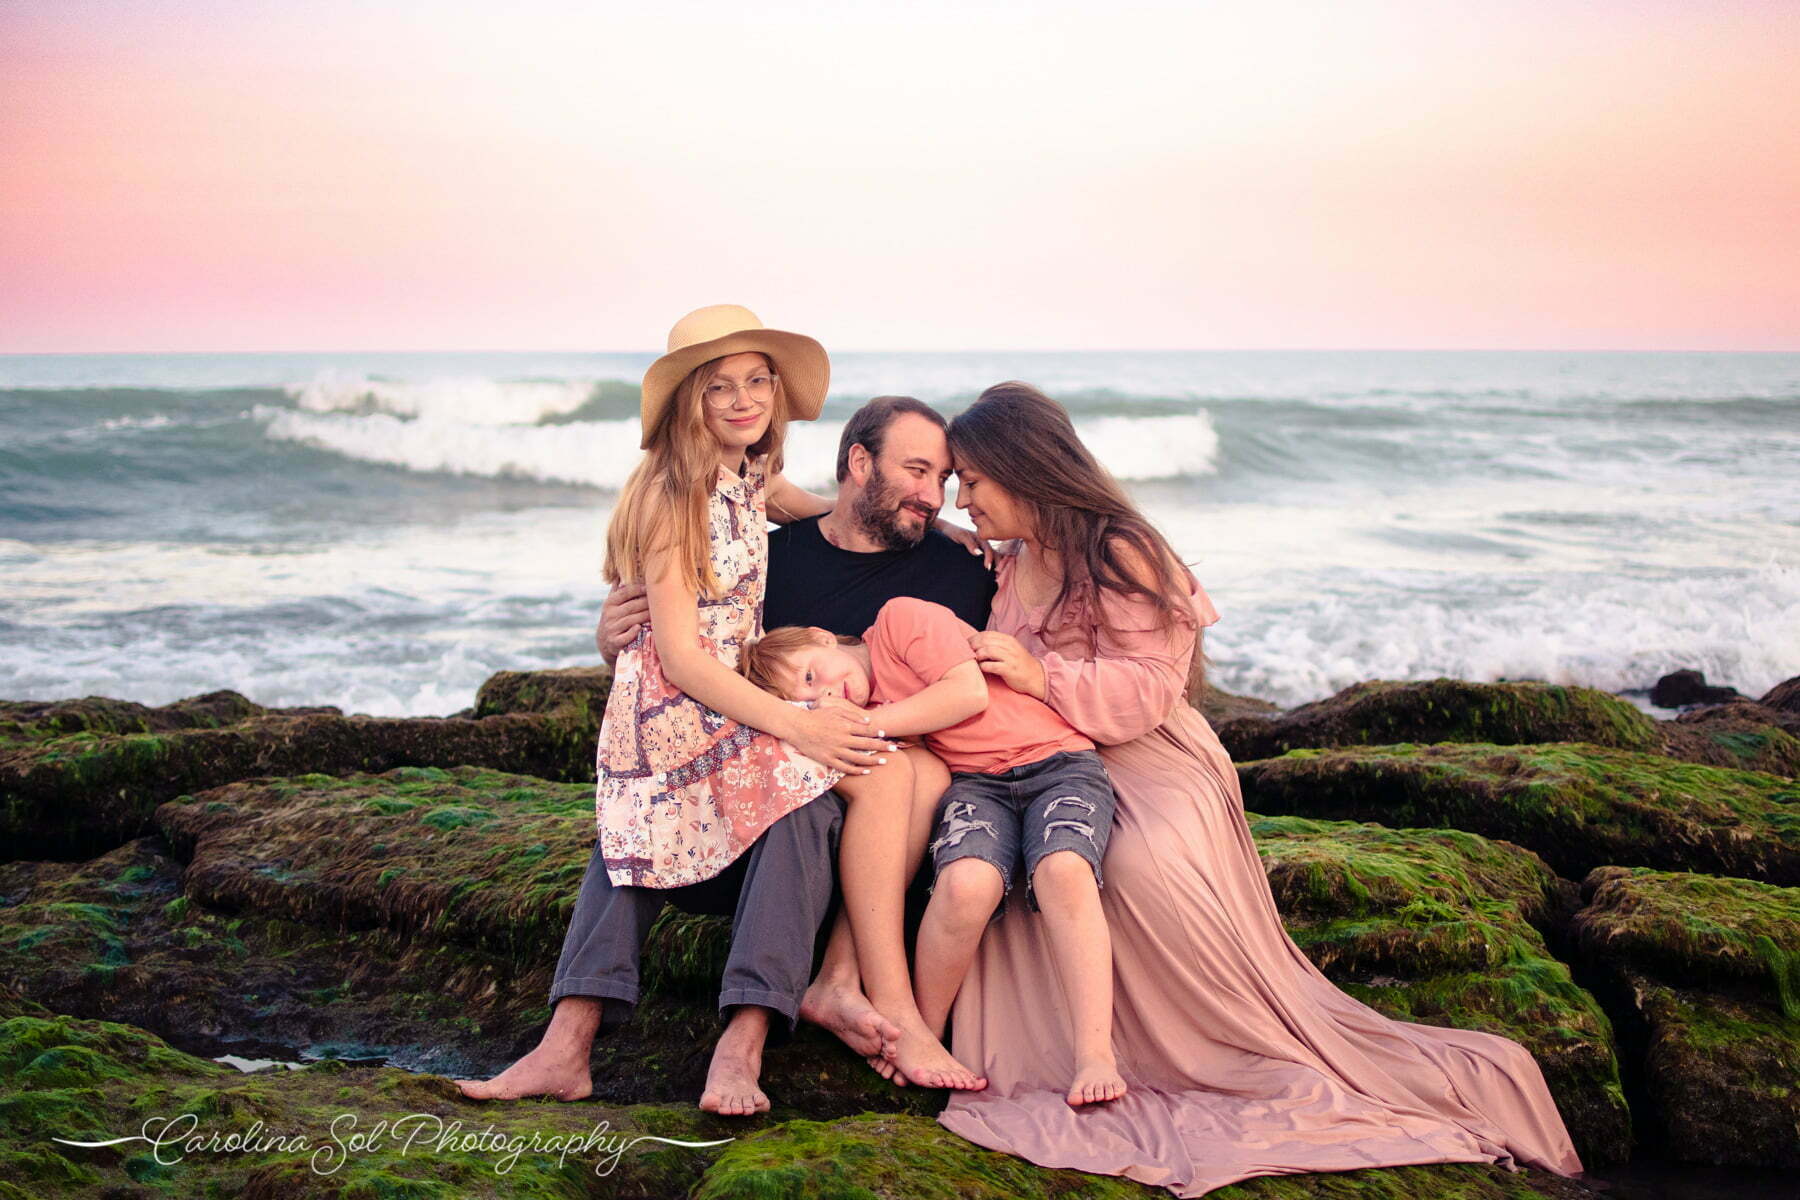 - 5 helpful tips what to wear beach family photography style guide